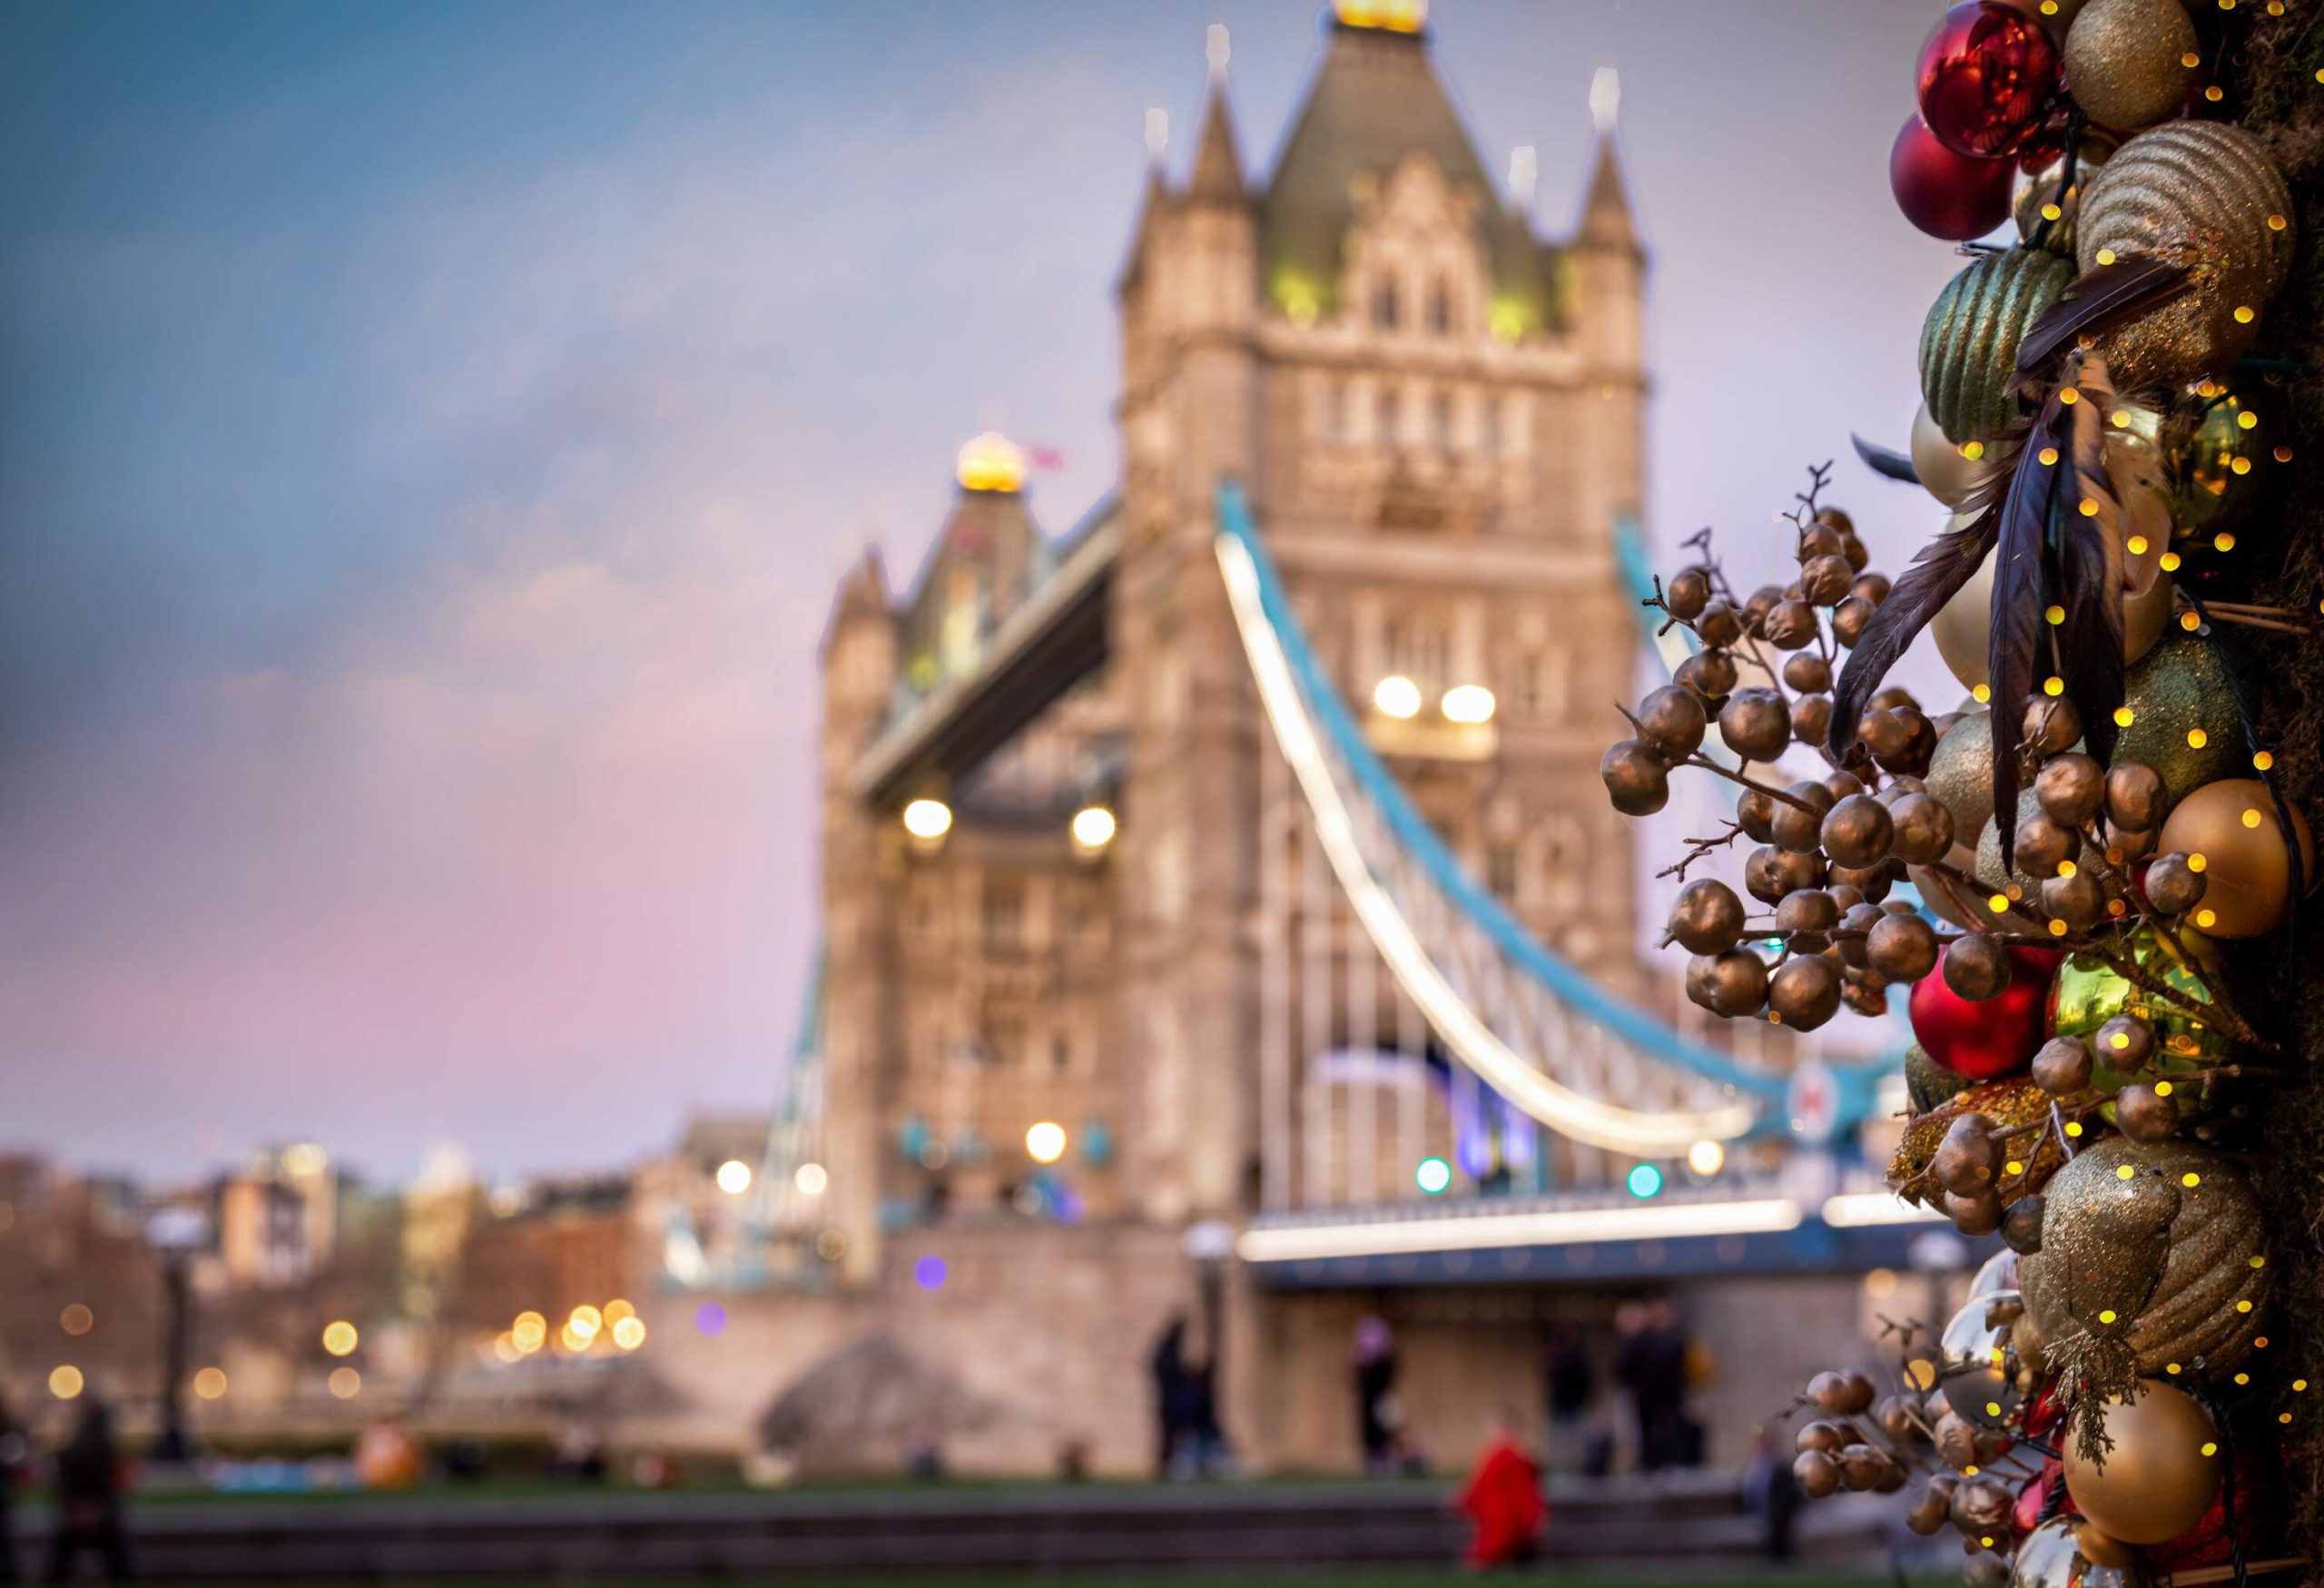 View to the illuminated Tower Bridge in London, United Kingdom, with christmas decorations in front for the festive season